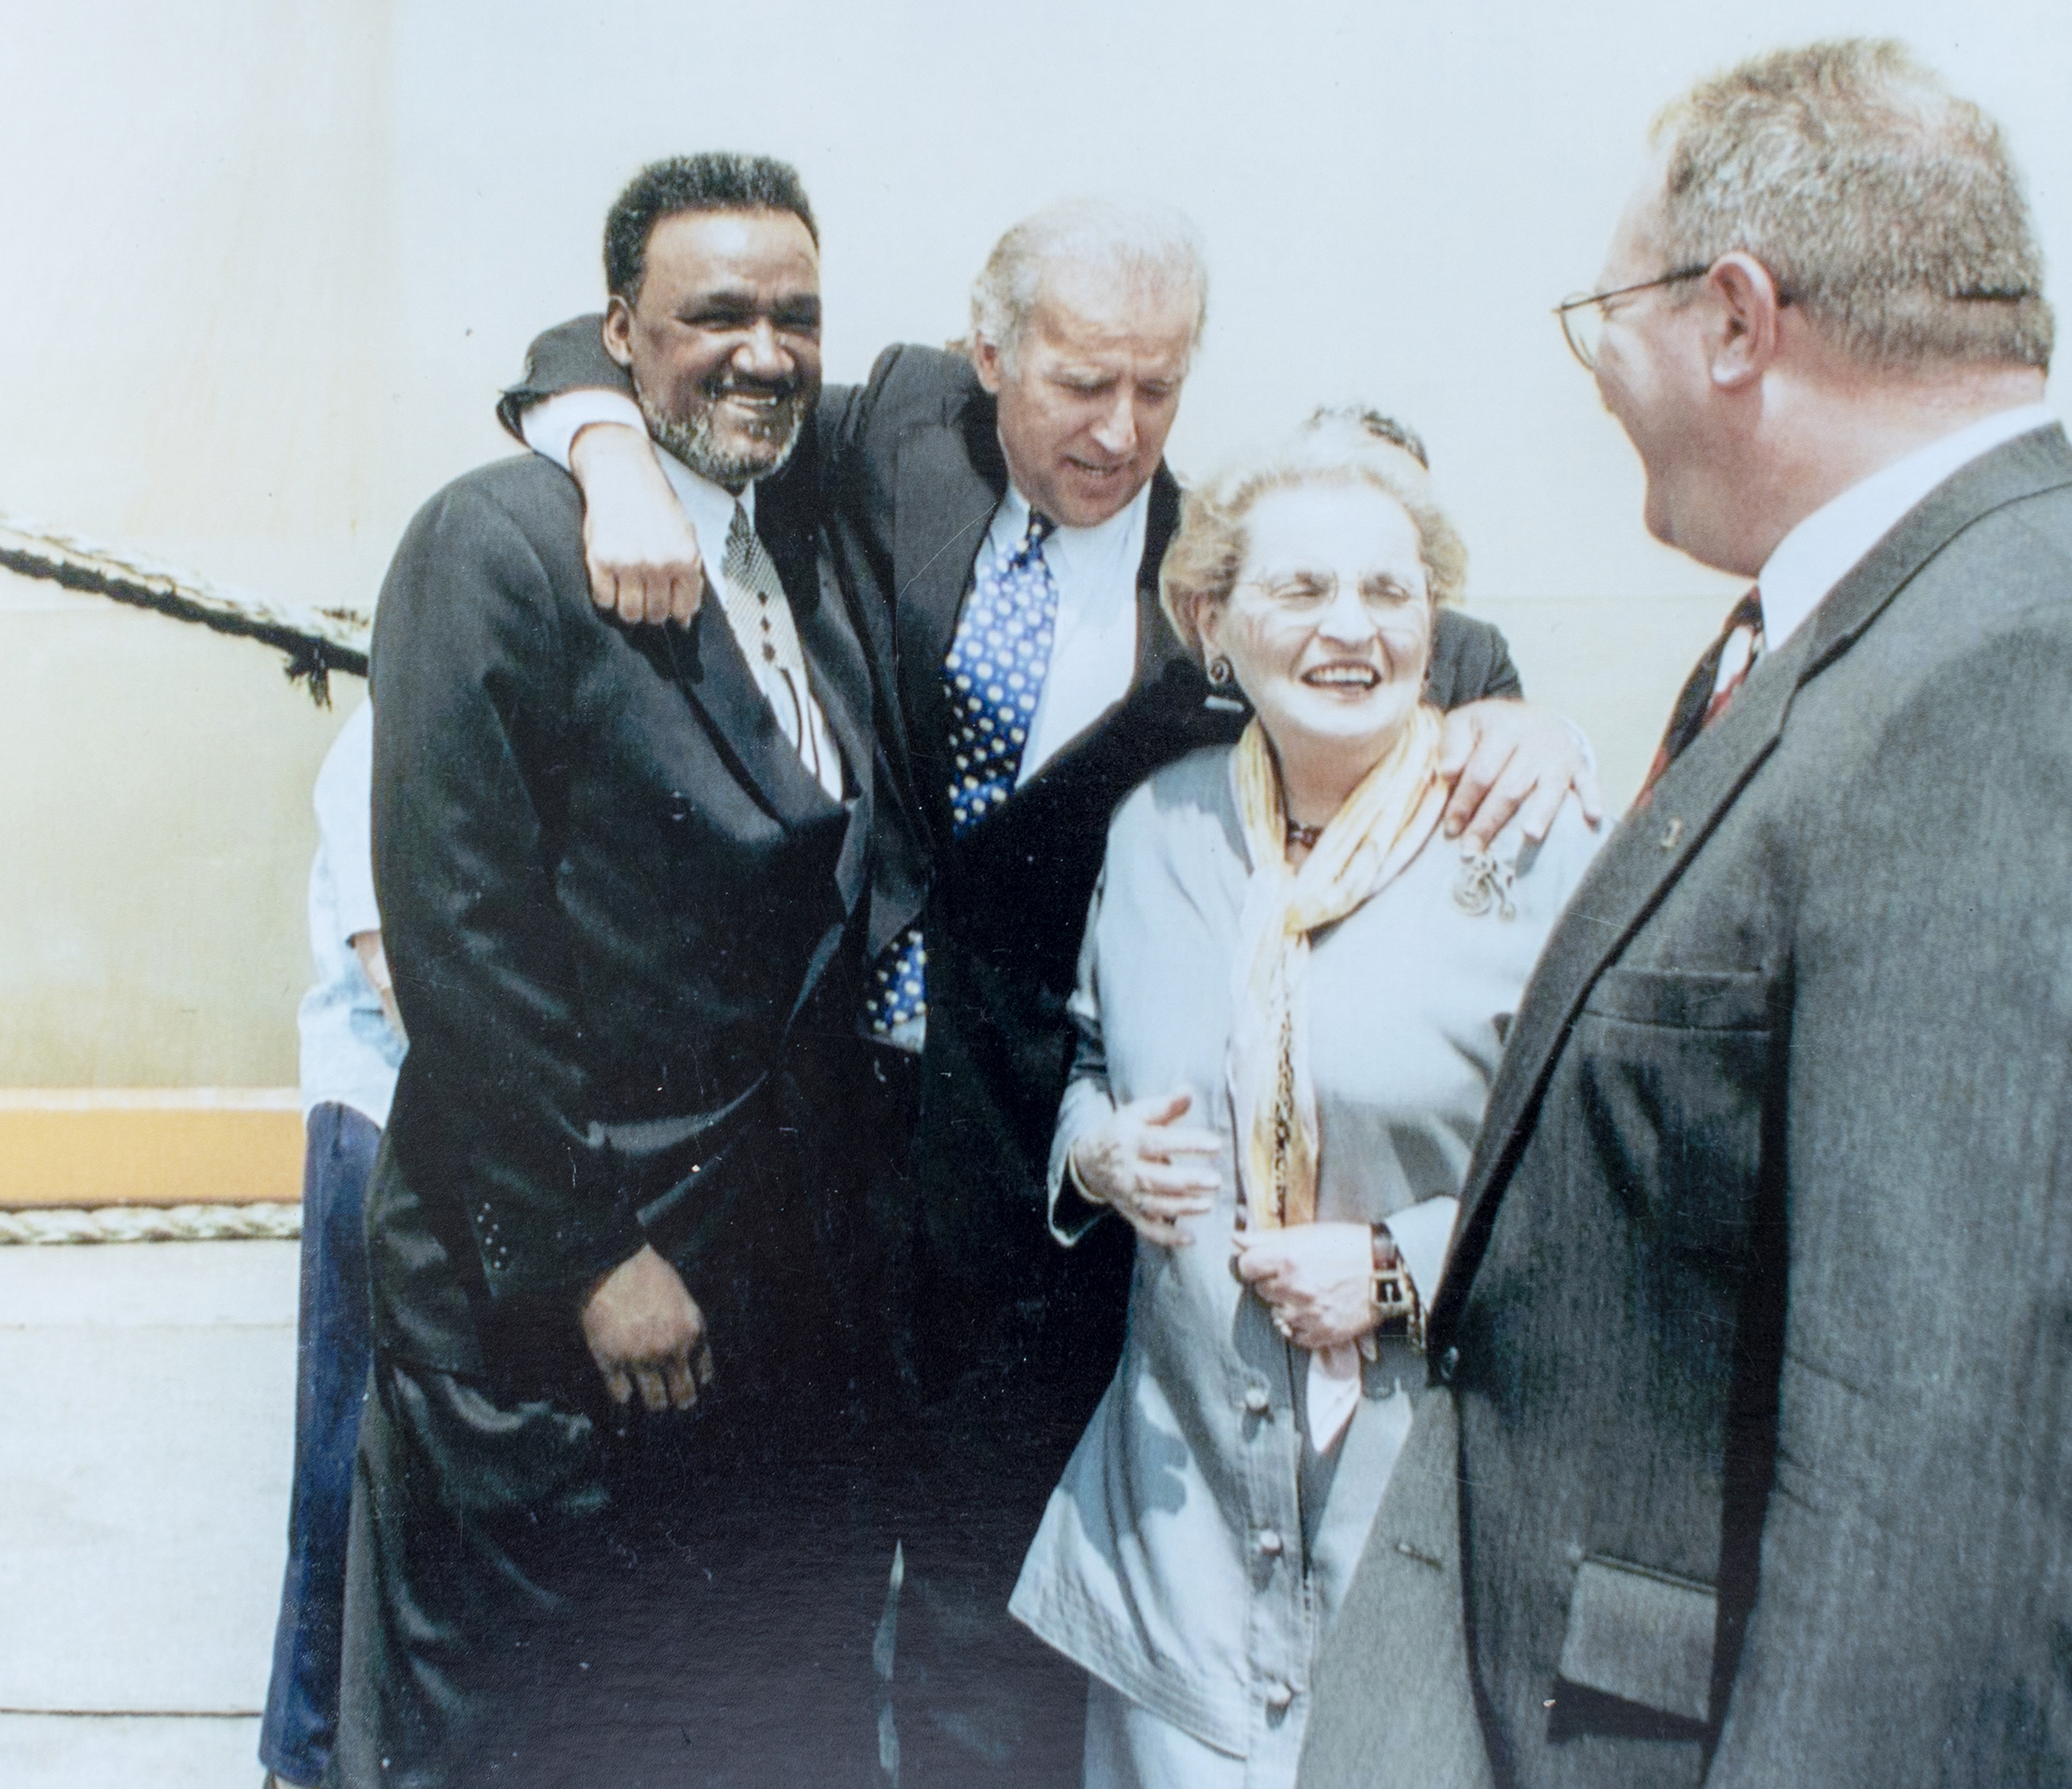 Richard "Mouse" Smith, left, with President Joe Biden, Madeleine Albright and Adam McBride sometime in the mid '90's. Smith is a Civil Rights leader in Delaware who has been friends with Biden since they were both young and when Biden was a lifeguard at the pool in Smith's neighborhood. Biden was best man at his wedding. (Andre Chung—The Washington Post/Getty Images)